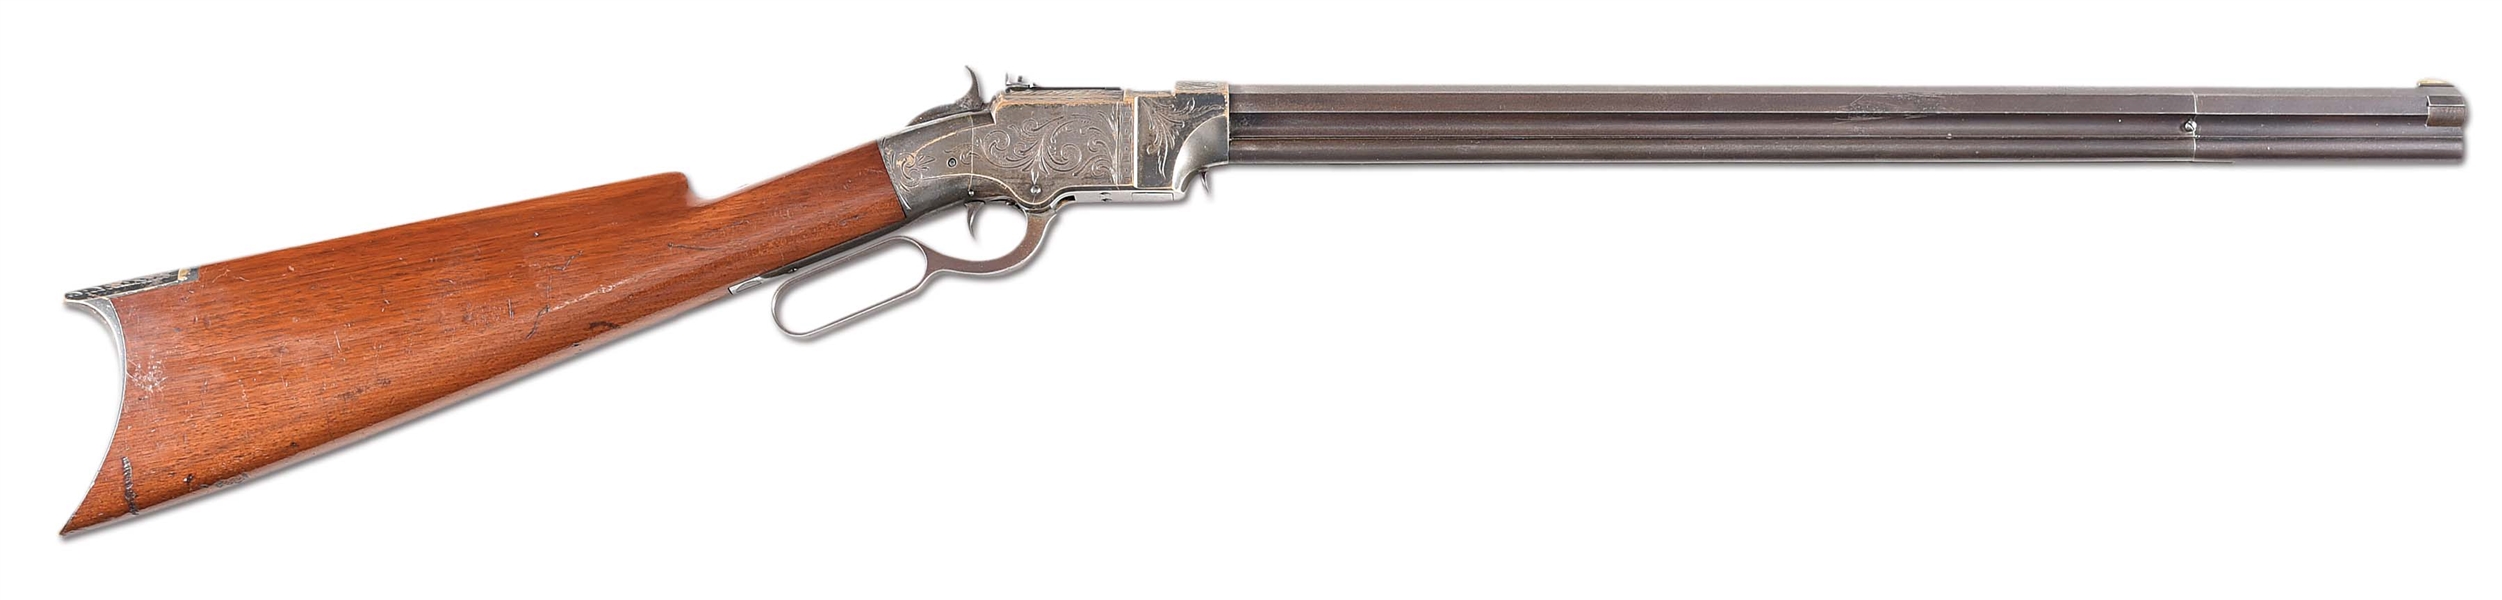 (A) ENGRAVED NEW HAVEN ARMS VOLCANIC LEVER ACTION CARBINE.